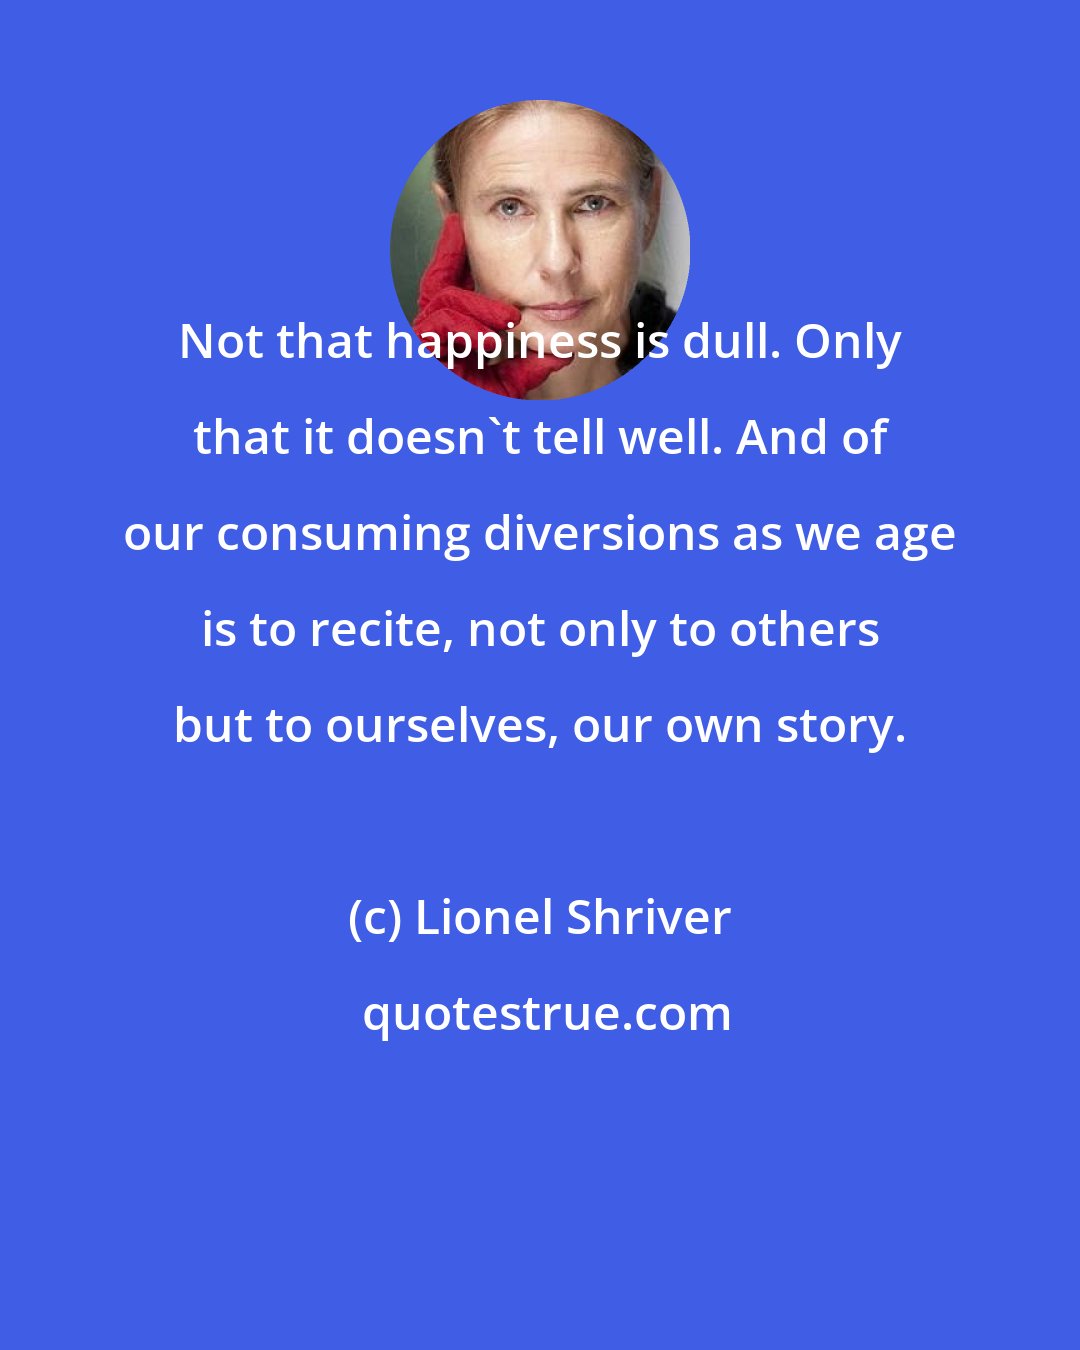 Lionel Shriver: Not that happiness is dull. Only that it doesn't tell well. And of our consuming diversions as we age is to recite, not only to others but to ourselves, our own story.